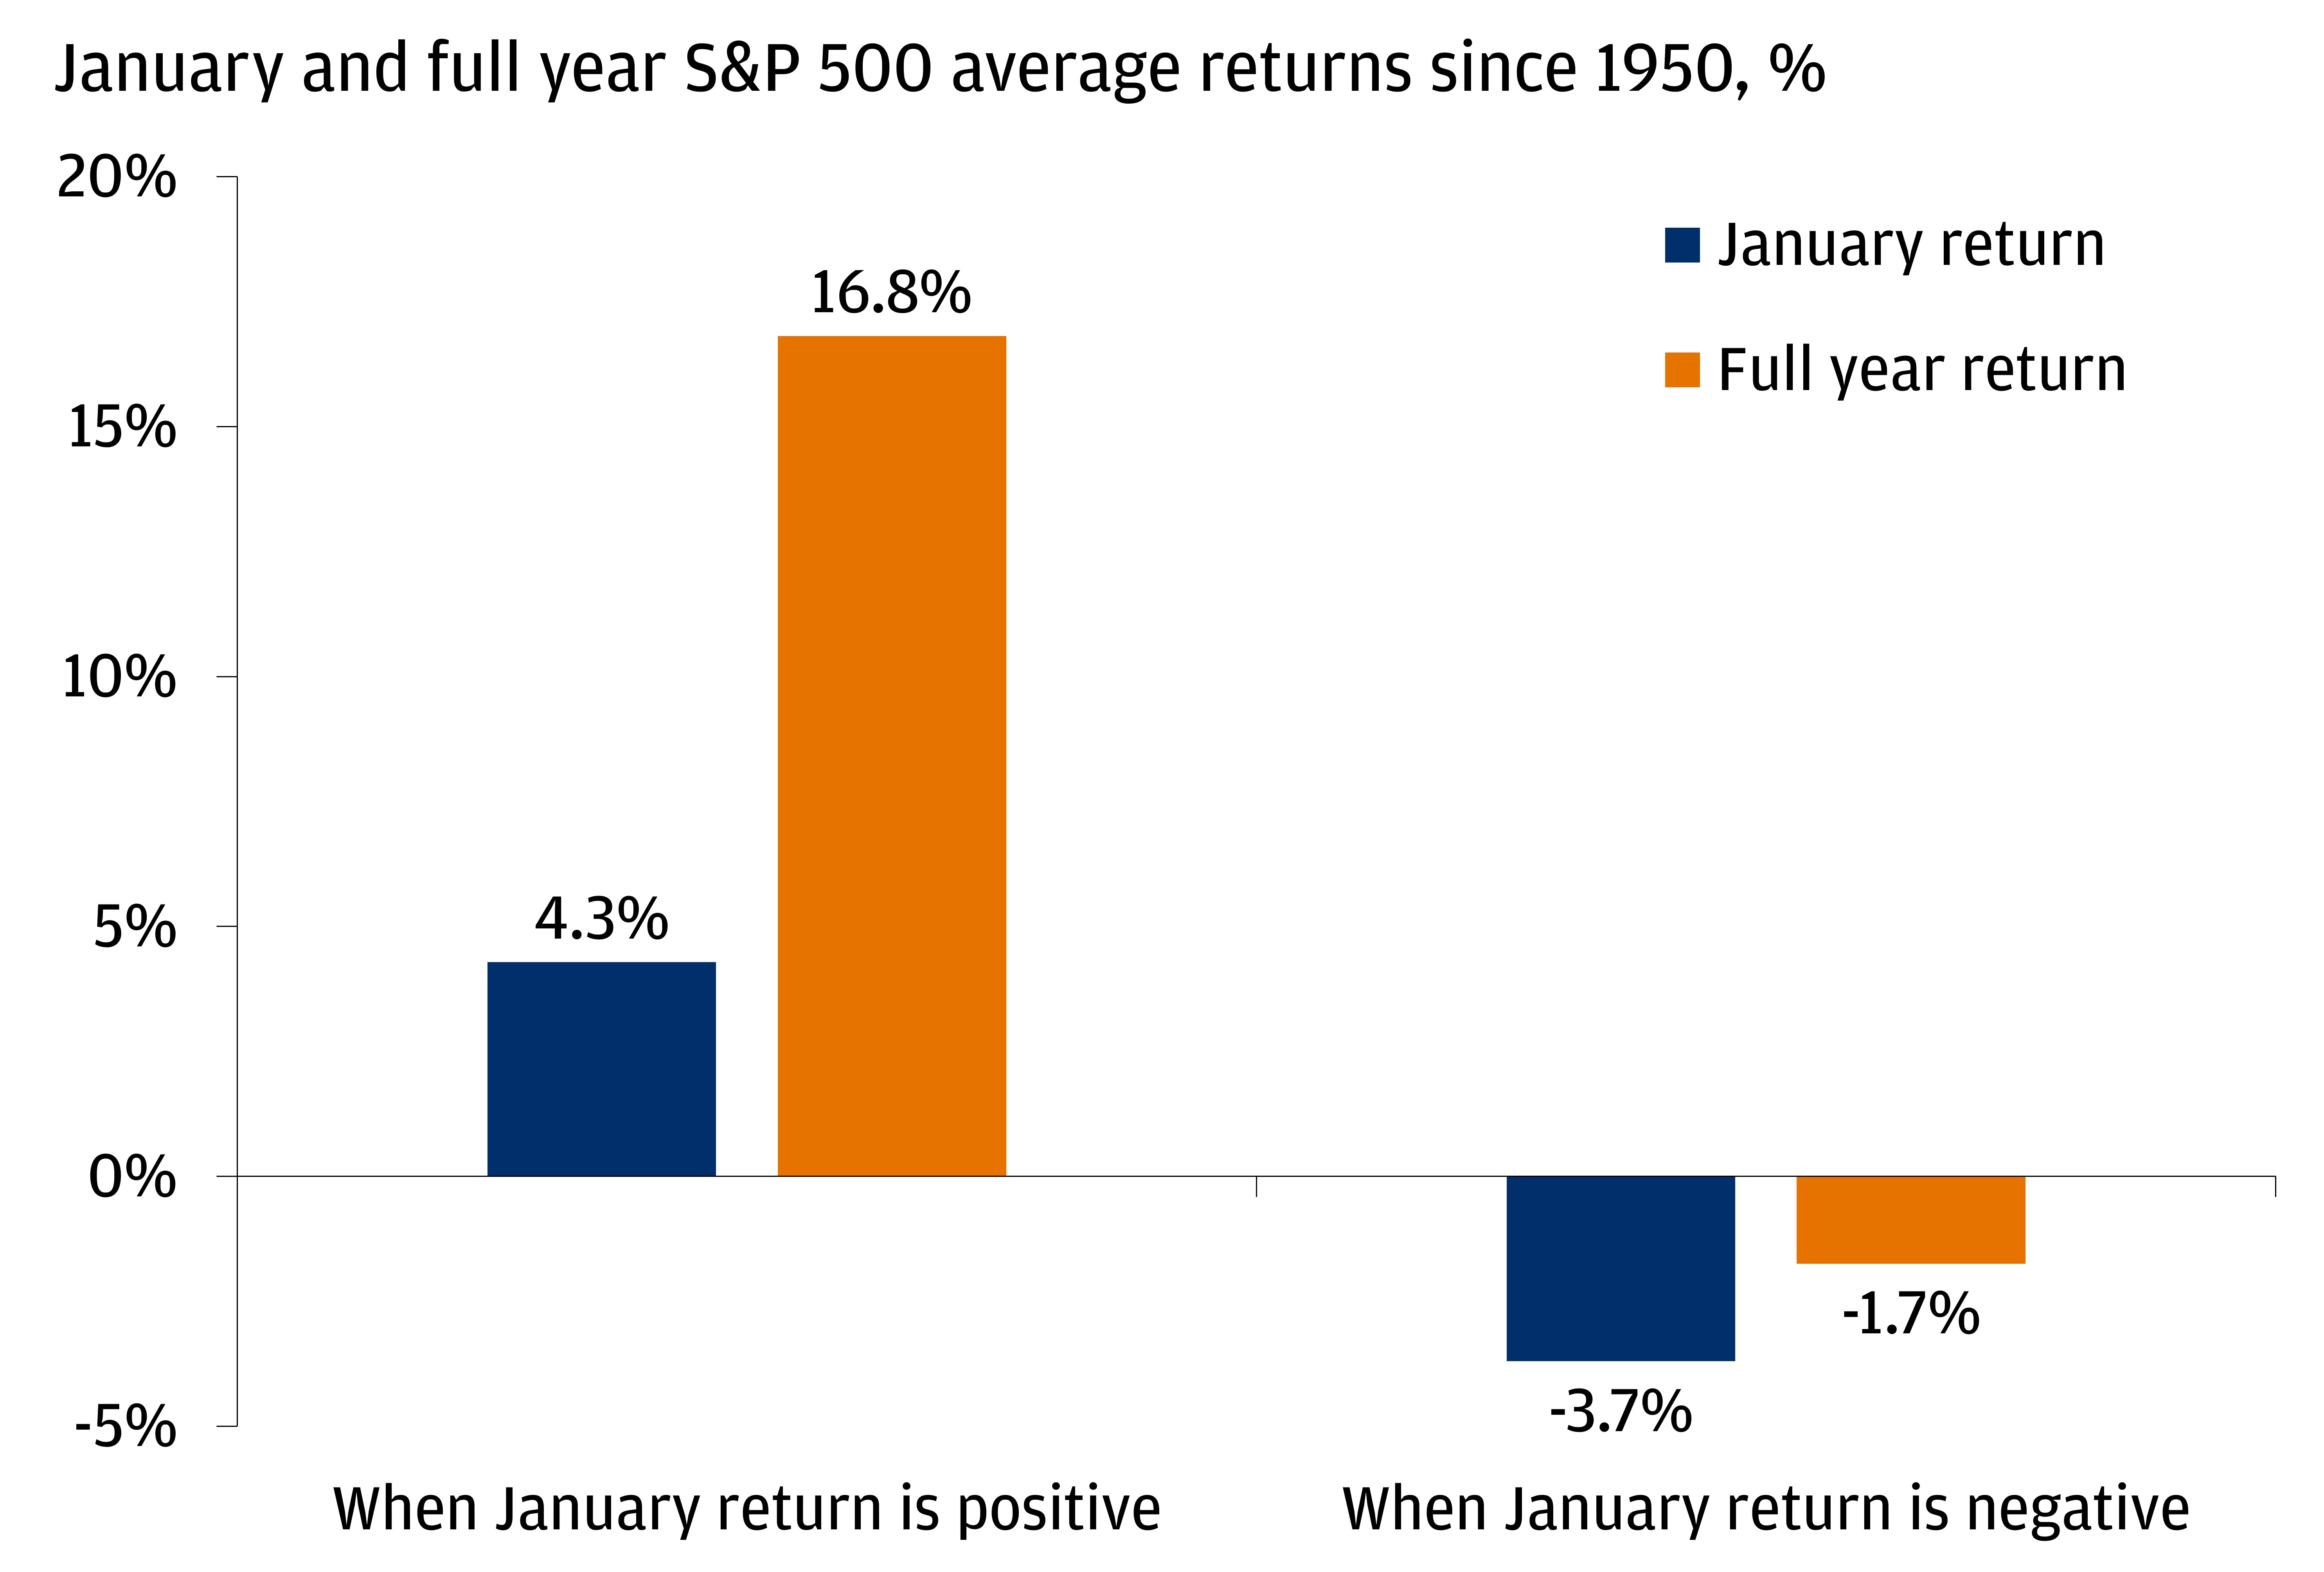 This bar chart shows the January and full-year S&P 500 average return since 1950 in percentages. 